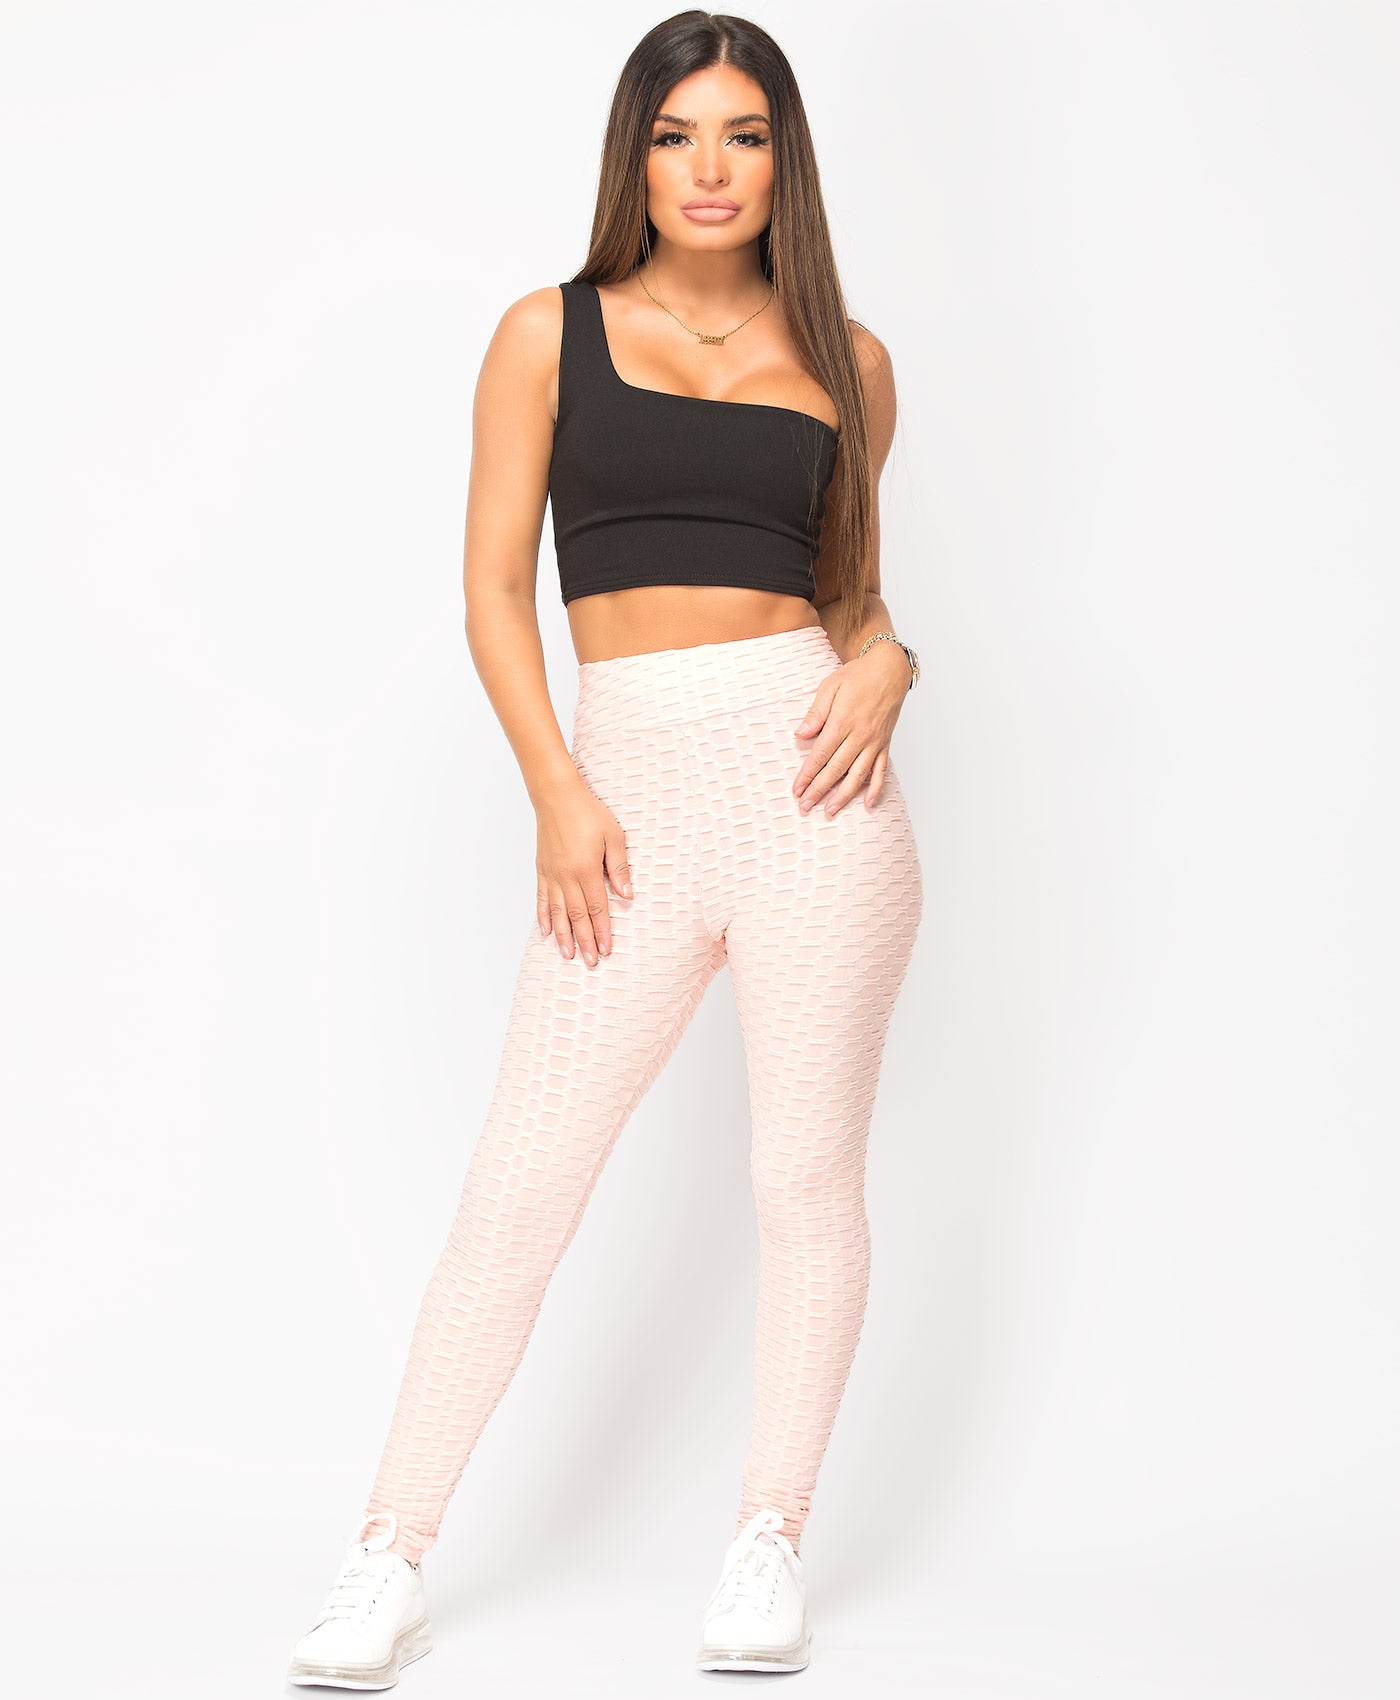 Women Honeycomb Anti Cellulite Waffle Leggings, High Waist Yoga Pants  Bubble Textured, Scrunch/Ruched Butt Lift Running Tights (Color : Light  blue, Size : Medium) price in UAE,  UAE